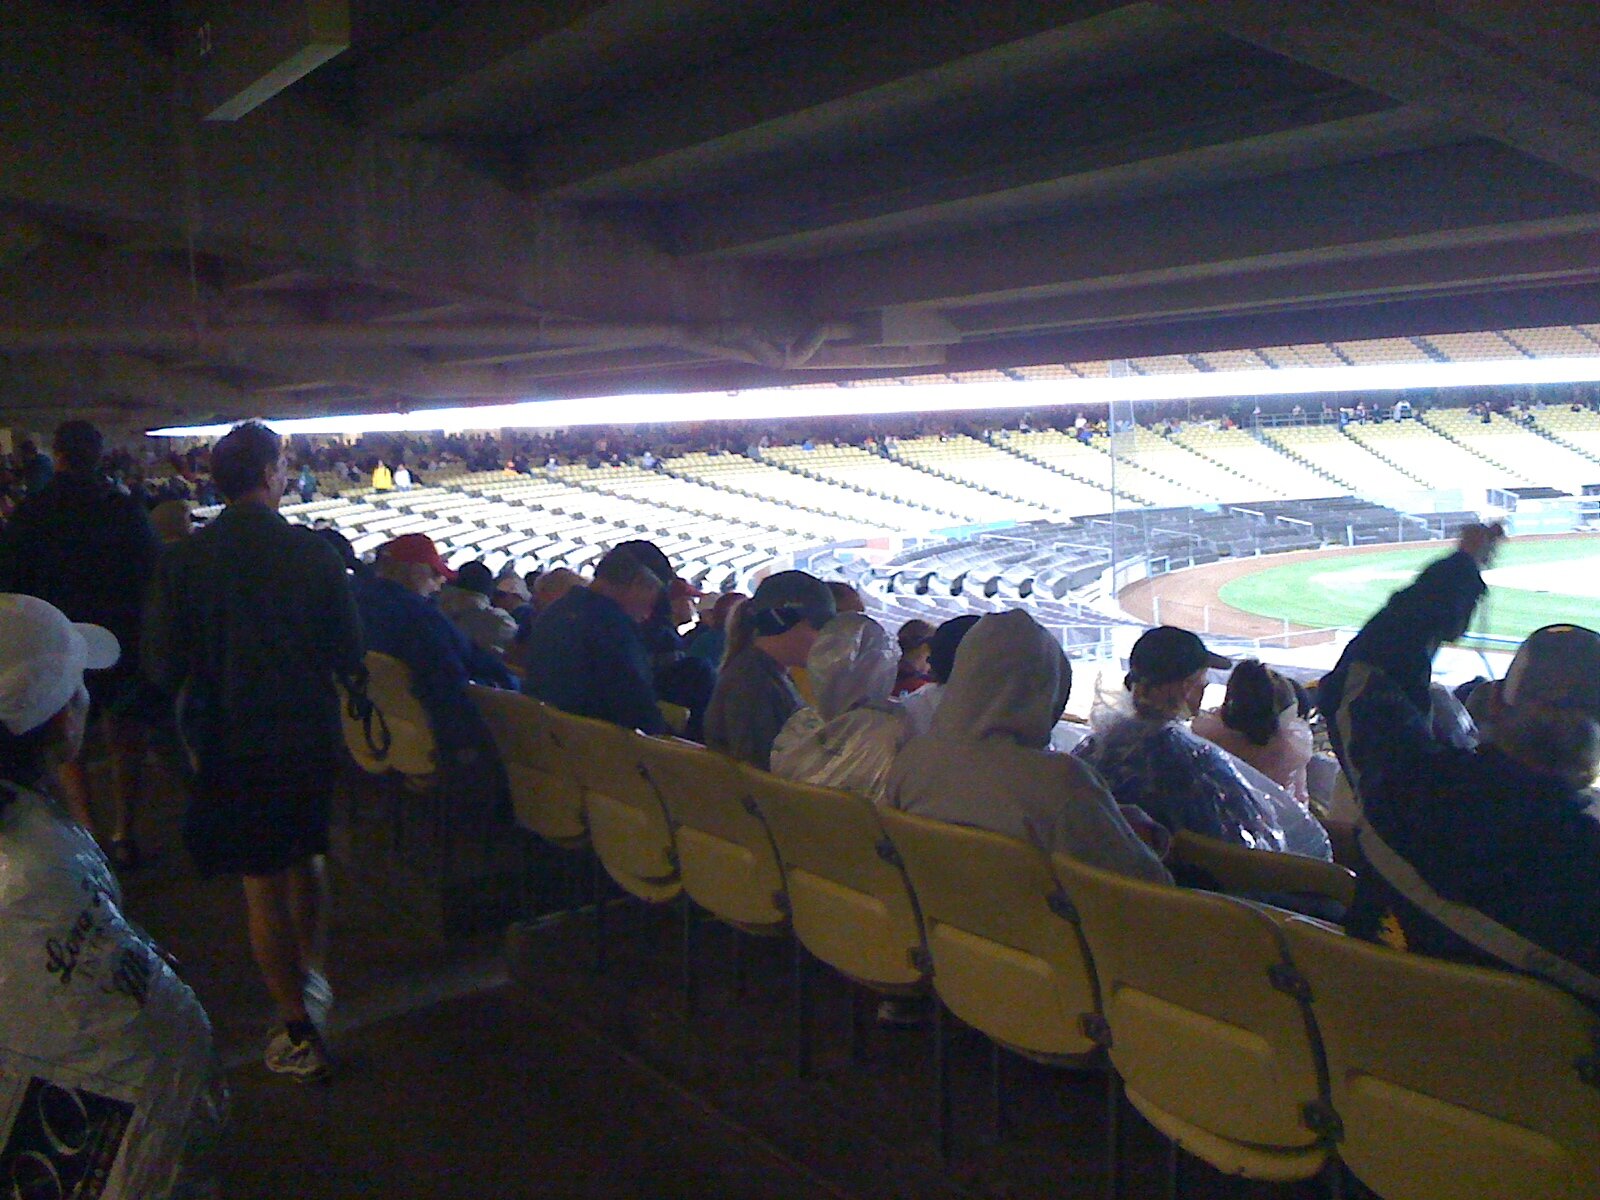  Runners at Dodgers Stadium getting out of the rain by sitting in the bleachers as they wait for the start of the marathon.  